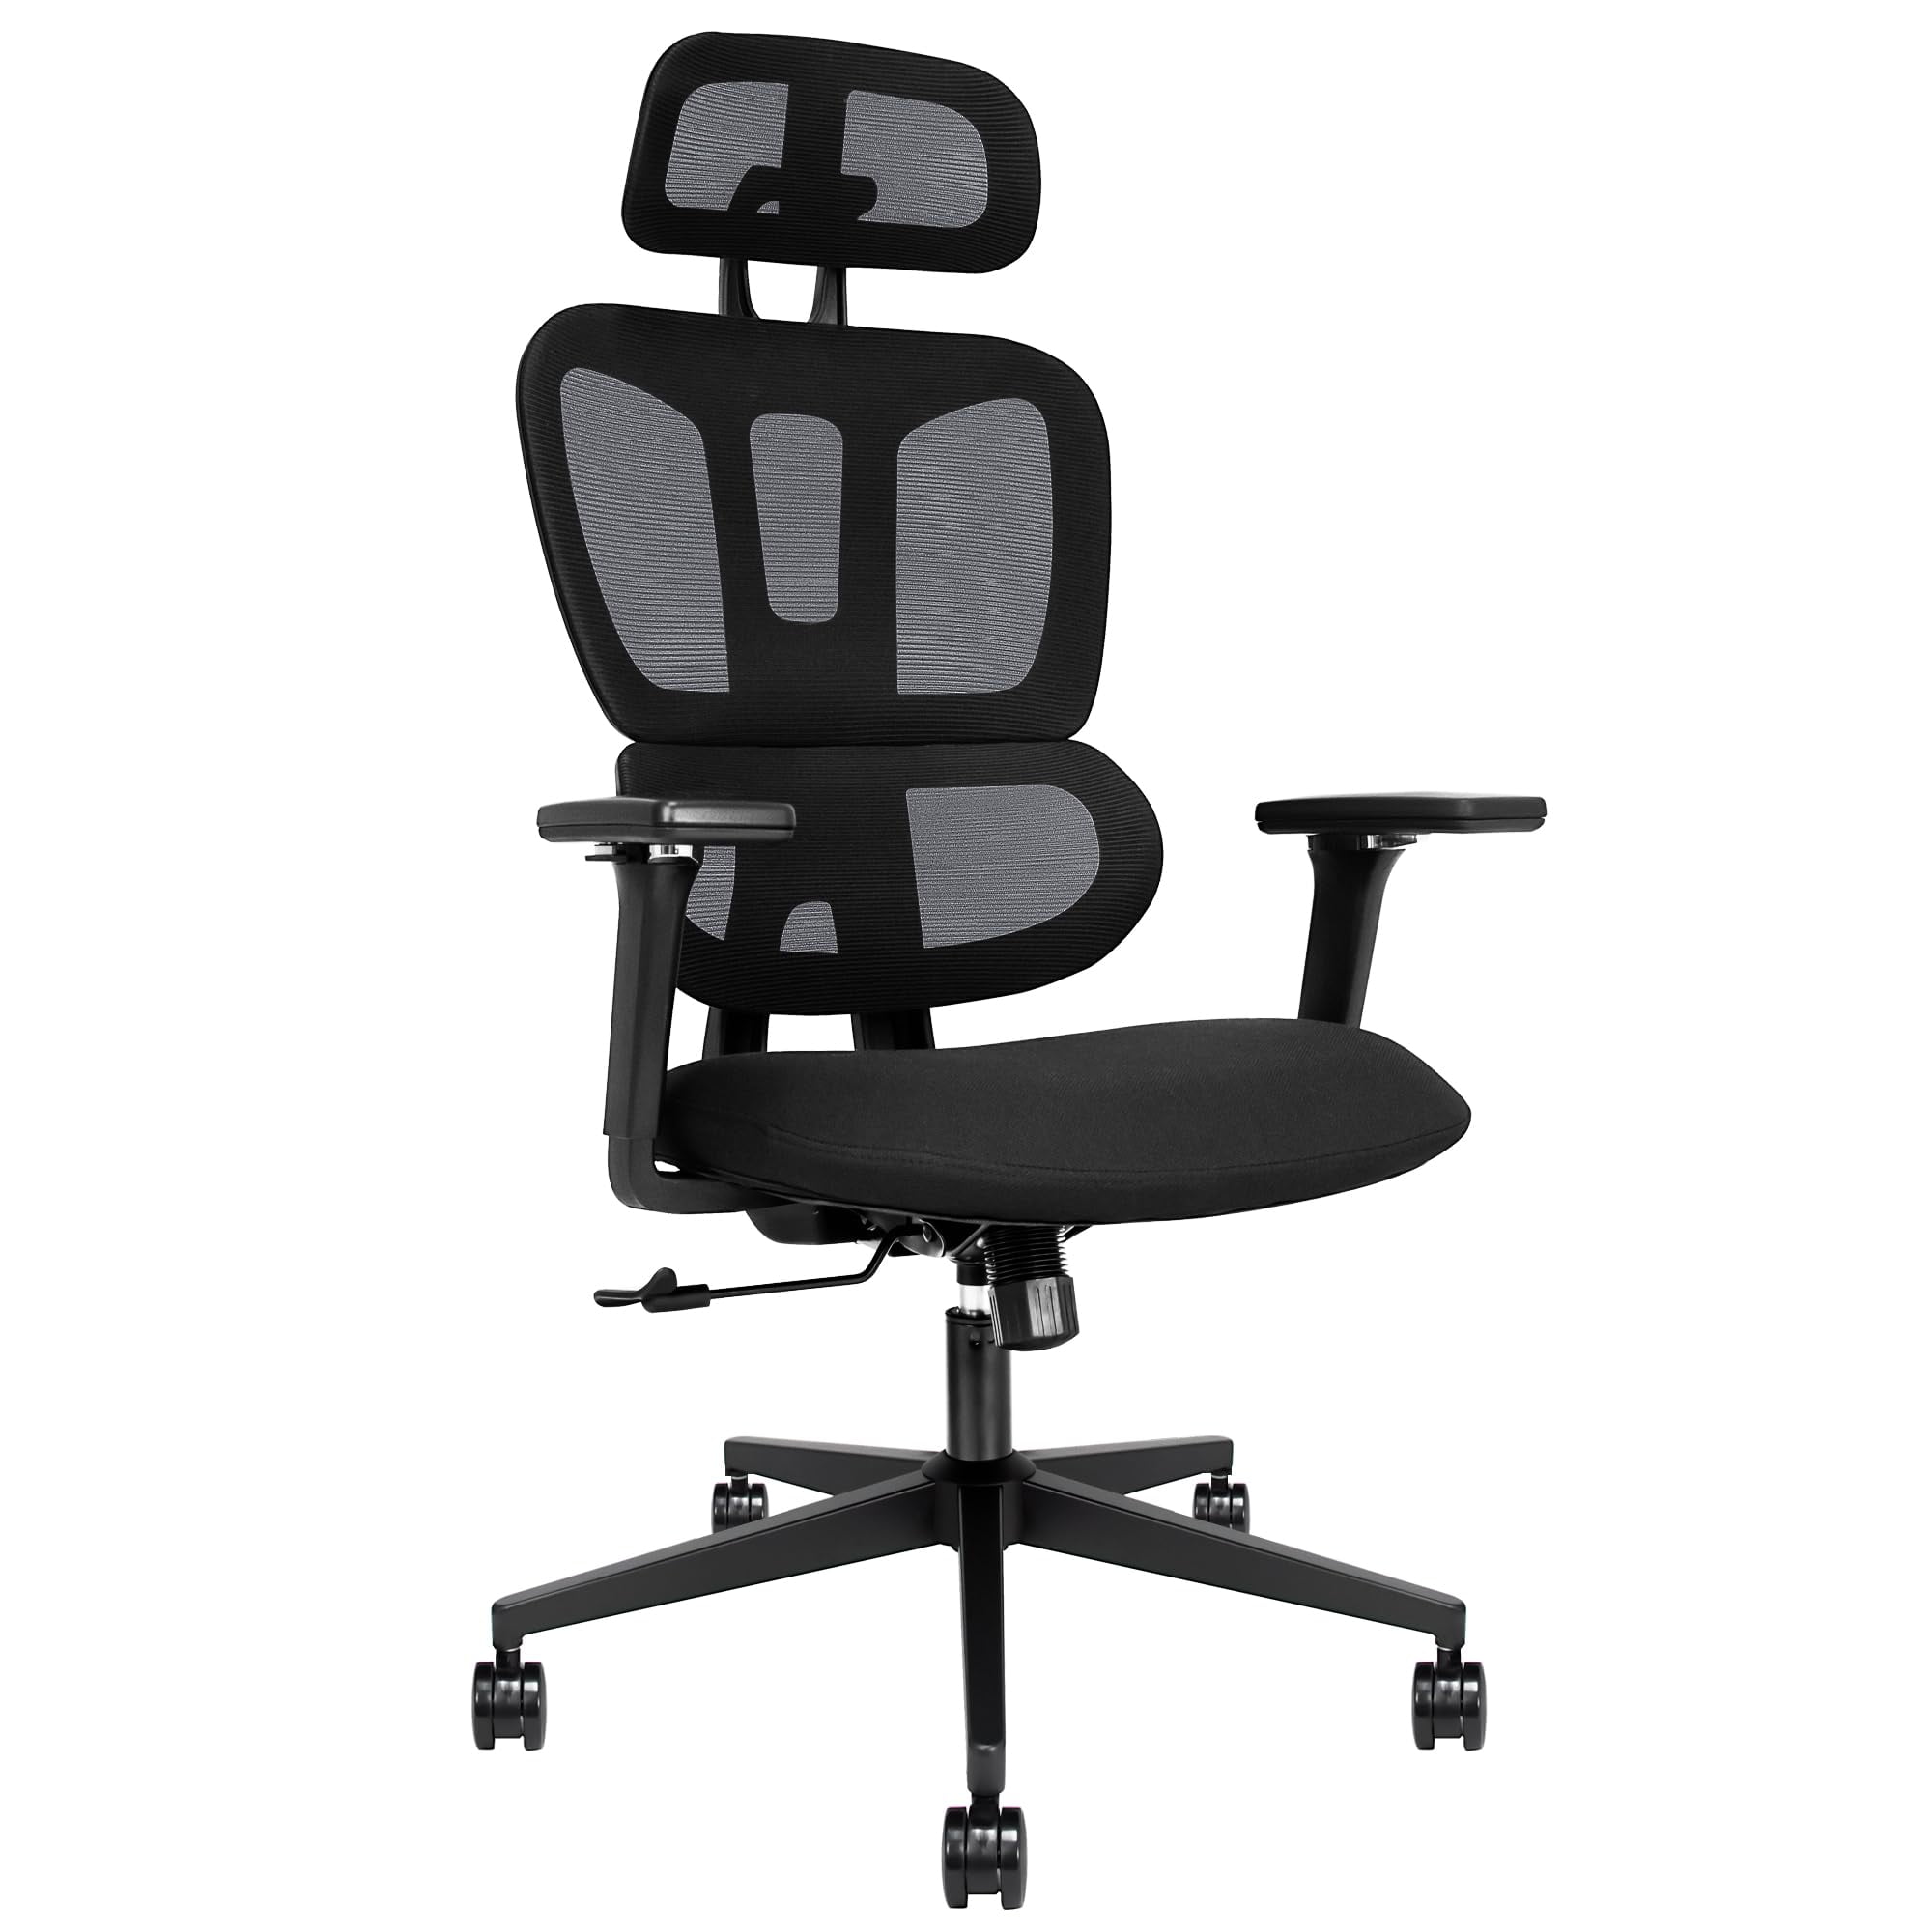 SAMOFU Ergonomic Office Chair with Foot Rest, High Back Desk Chair